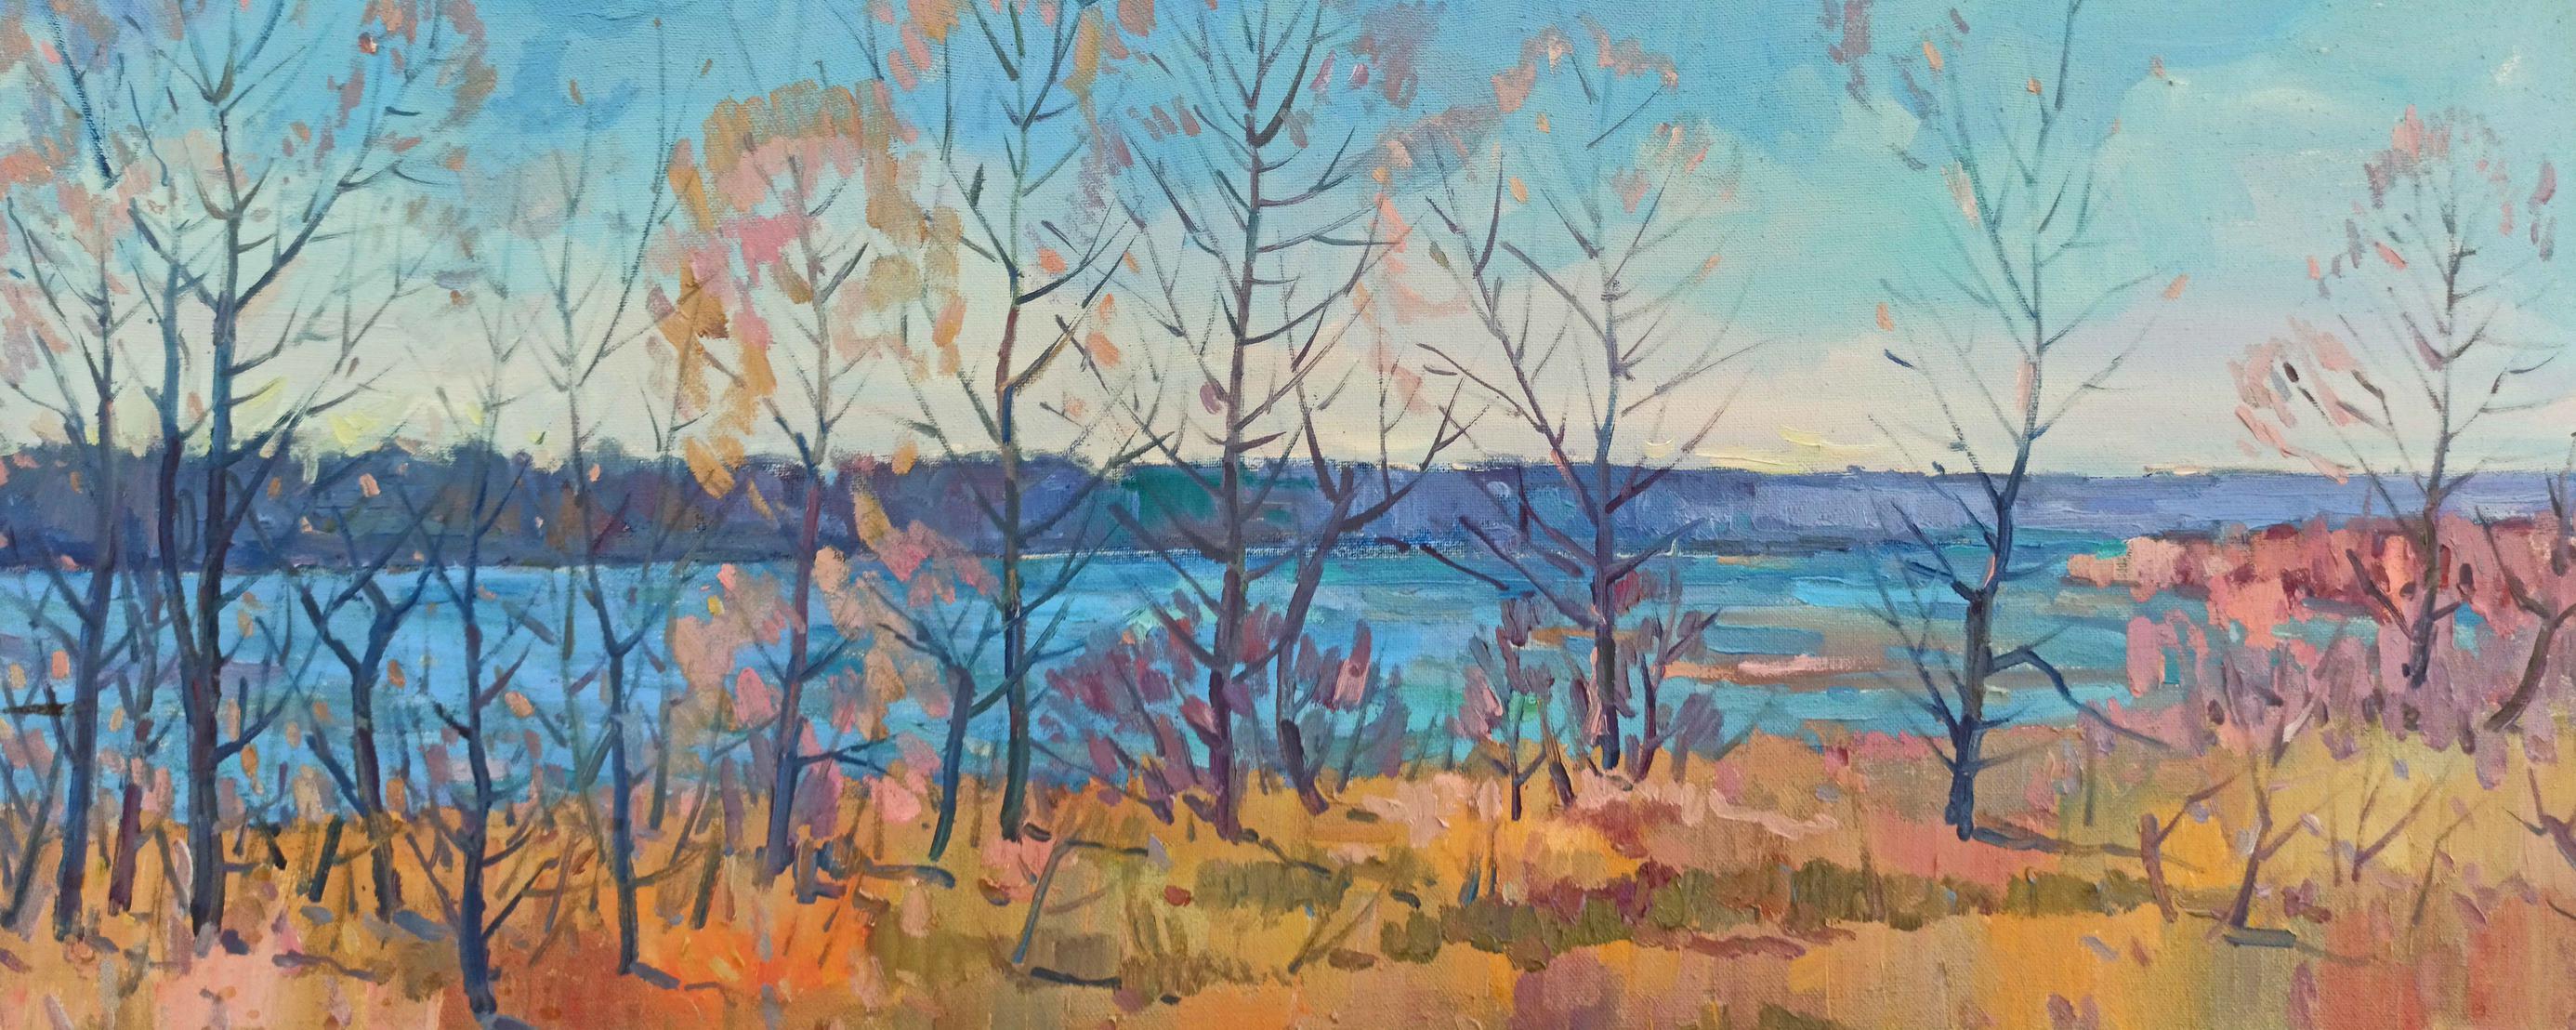 Peter Tovpev Landscape Painting - Autumn Landscape, Impressionism, Original oil Painting, Ready to Hang